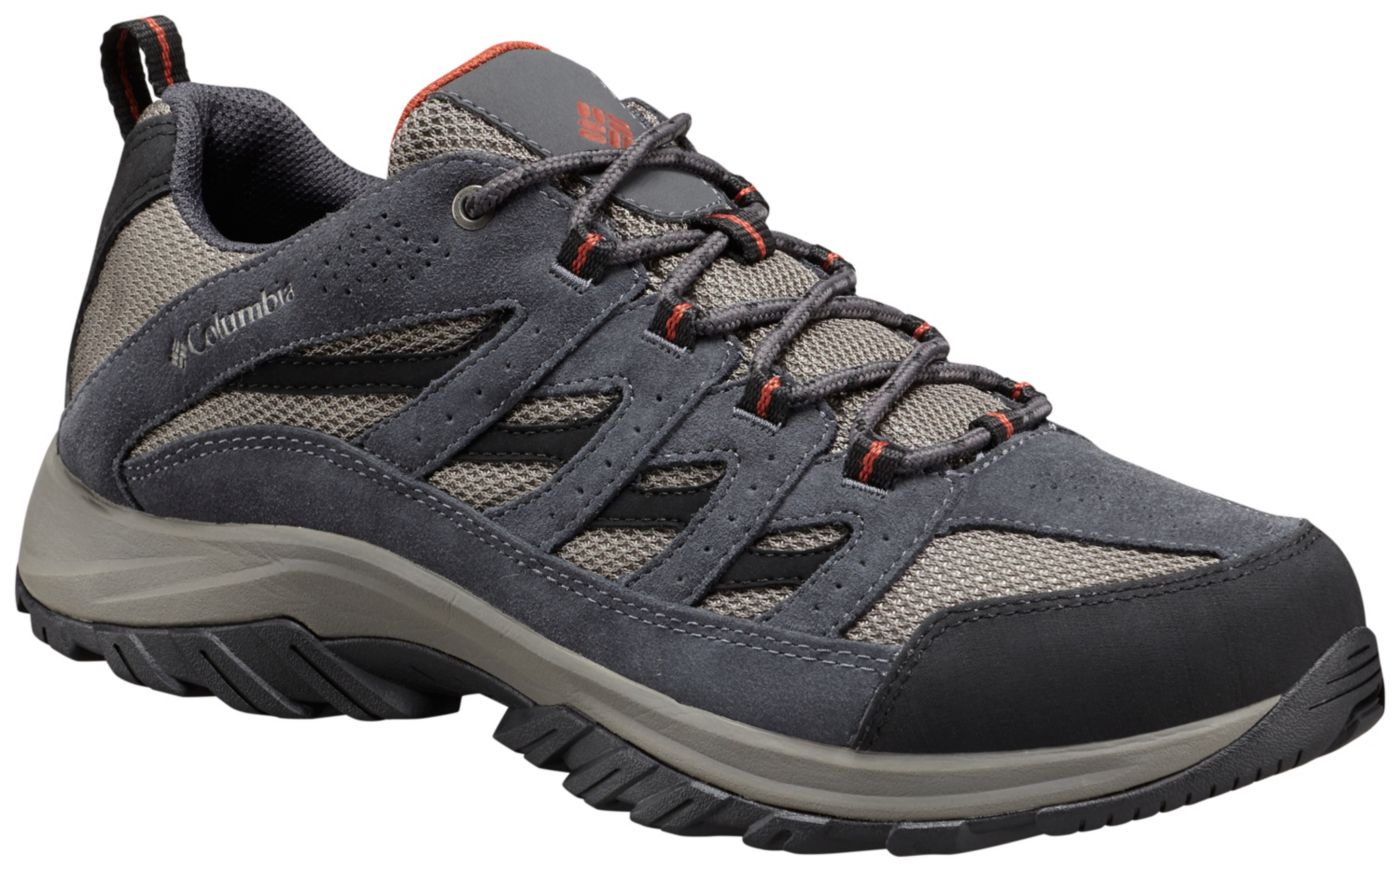 Columbia Men's Crestwood Hiking Shoes | DICK'S Sporting Goods